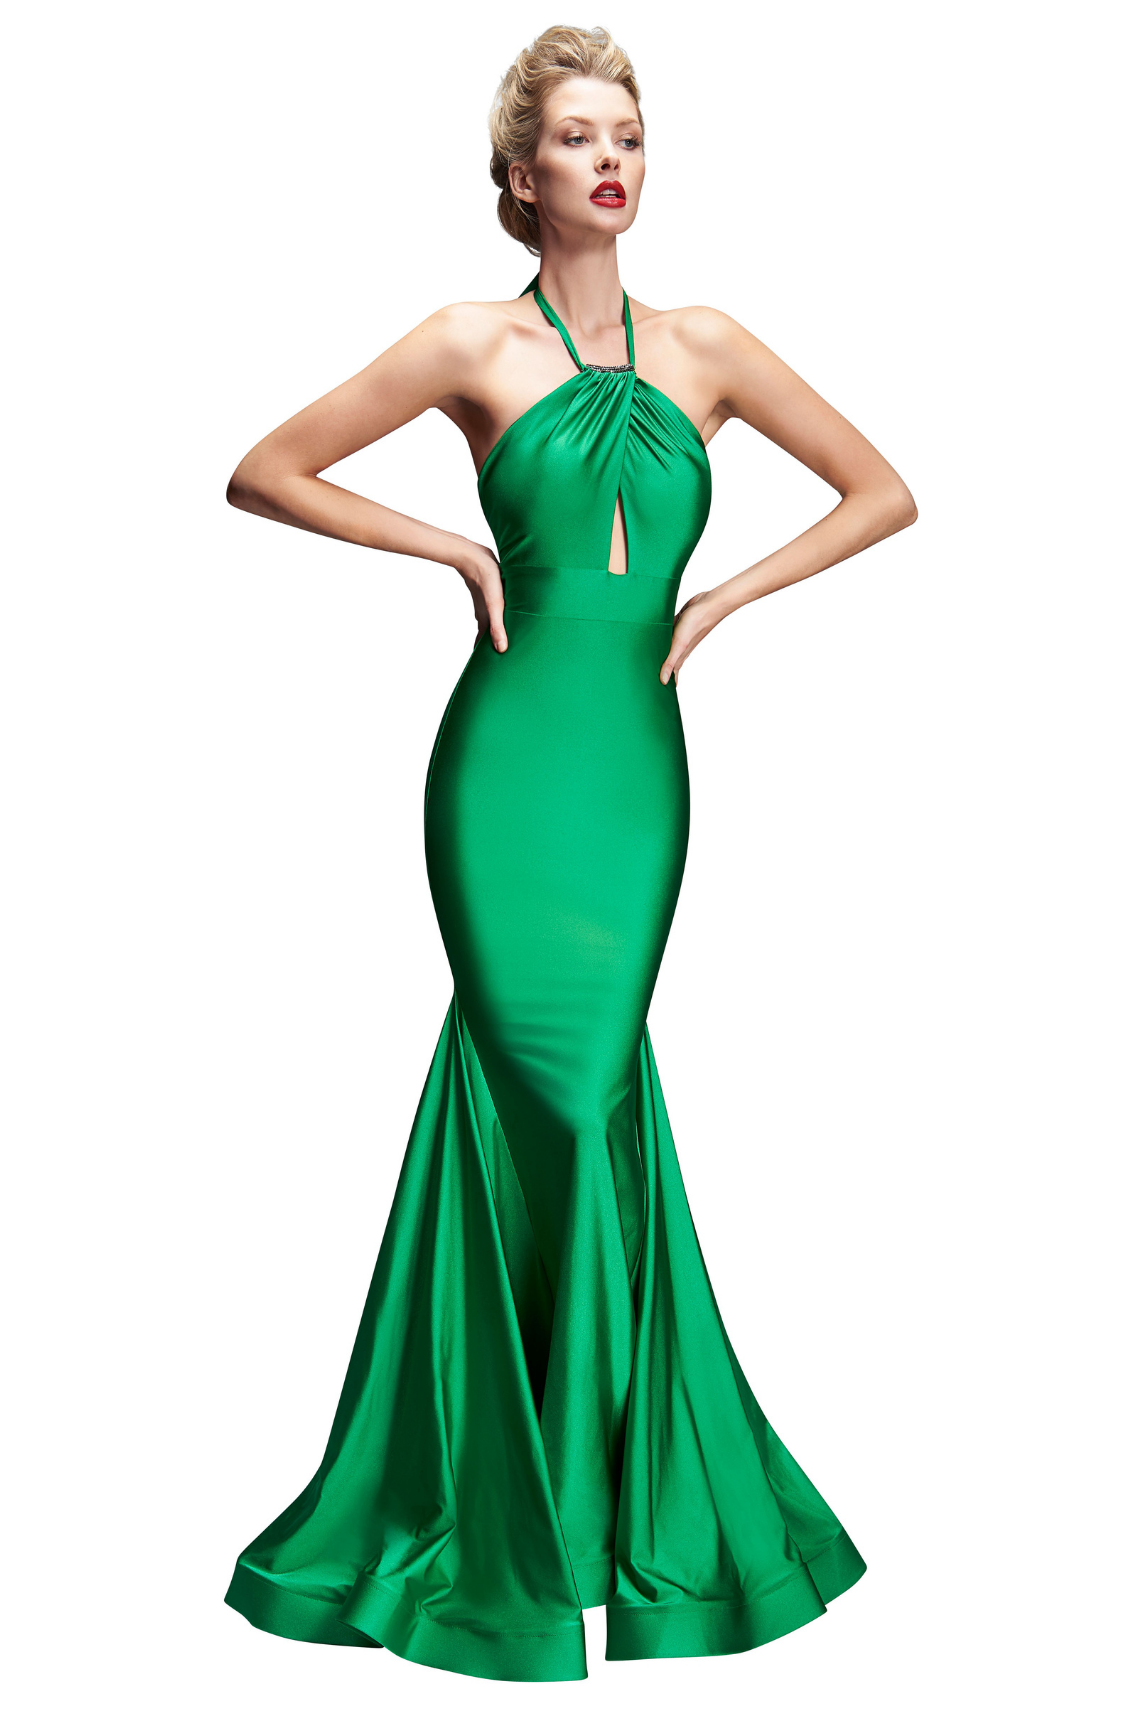 Model wearing a green evening gown